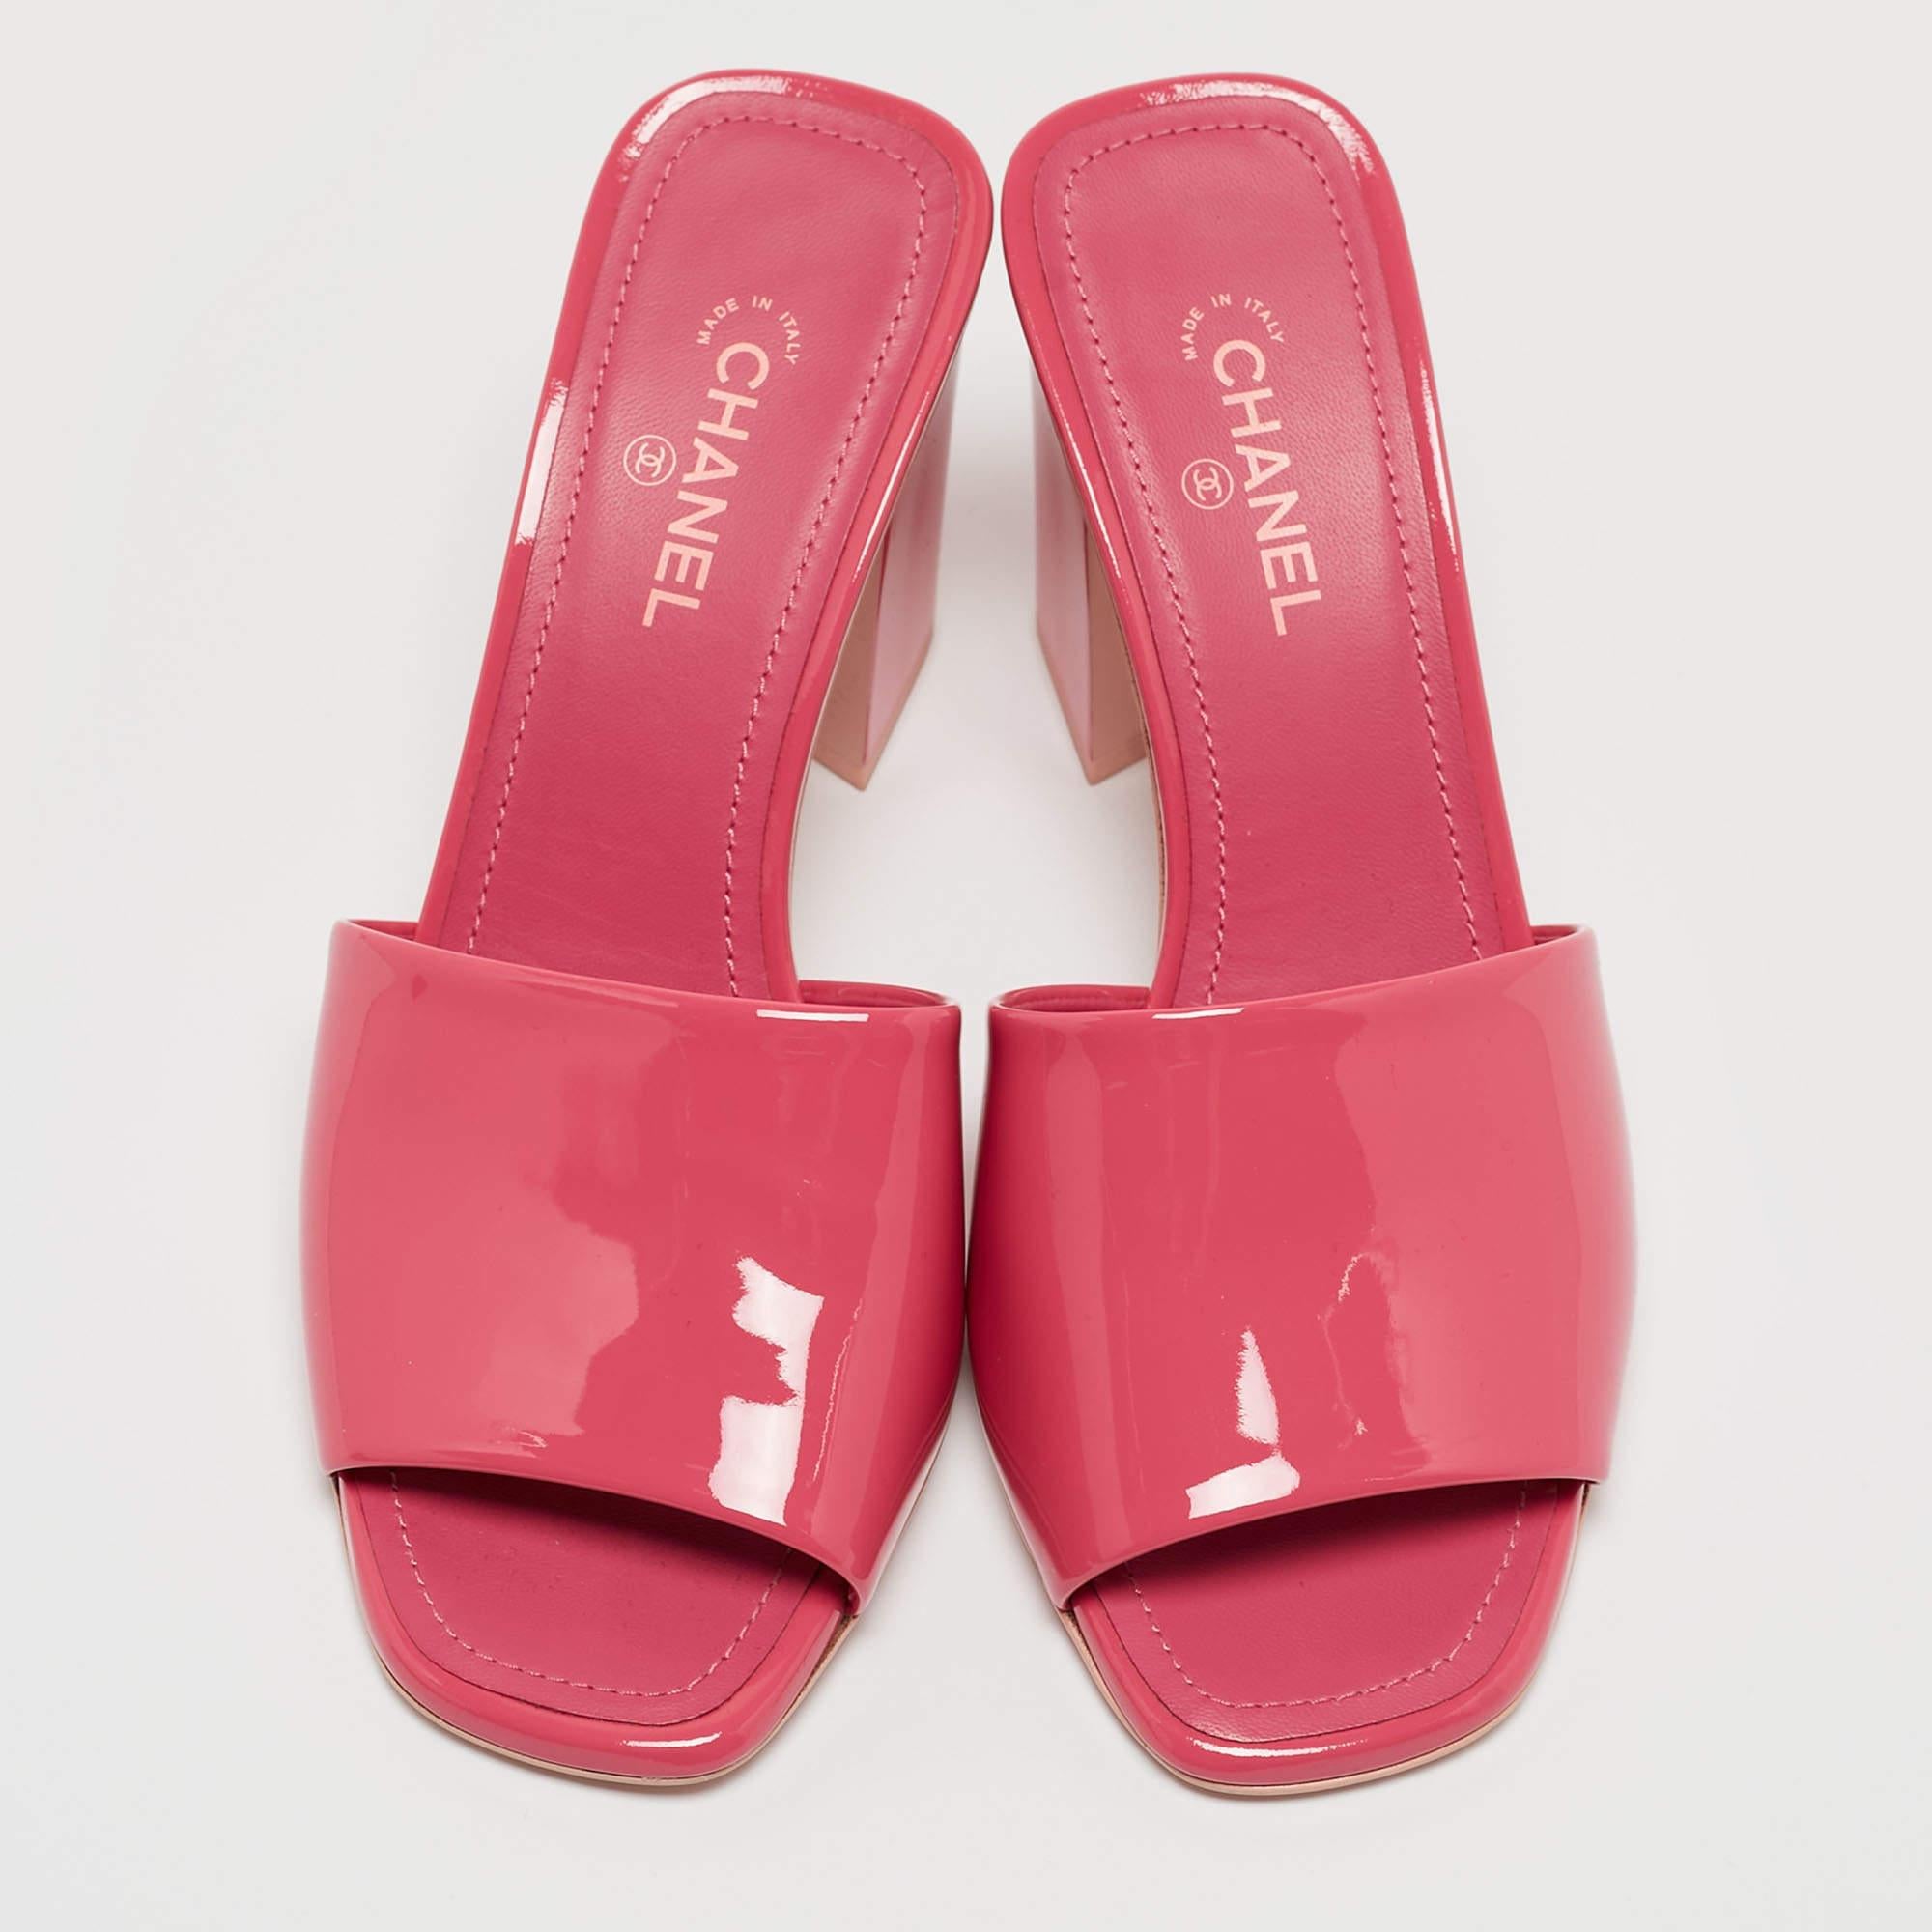 The fashion house’s tradition of excellence, coupled with modern design sensibilities, works to make these Chanel slides a fabulous choice. They'll help you deliver a chic look with ease.

Includes: Original Dustbag

